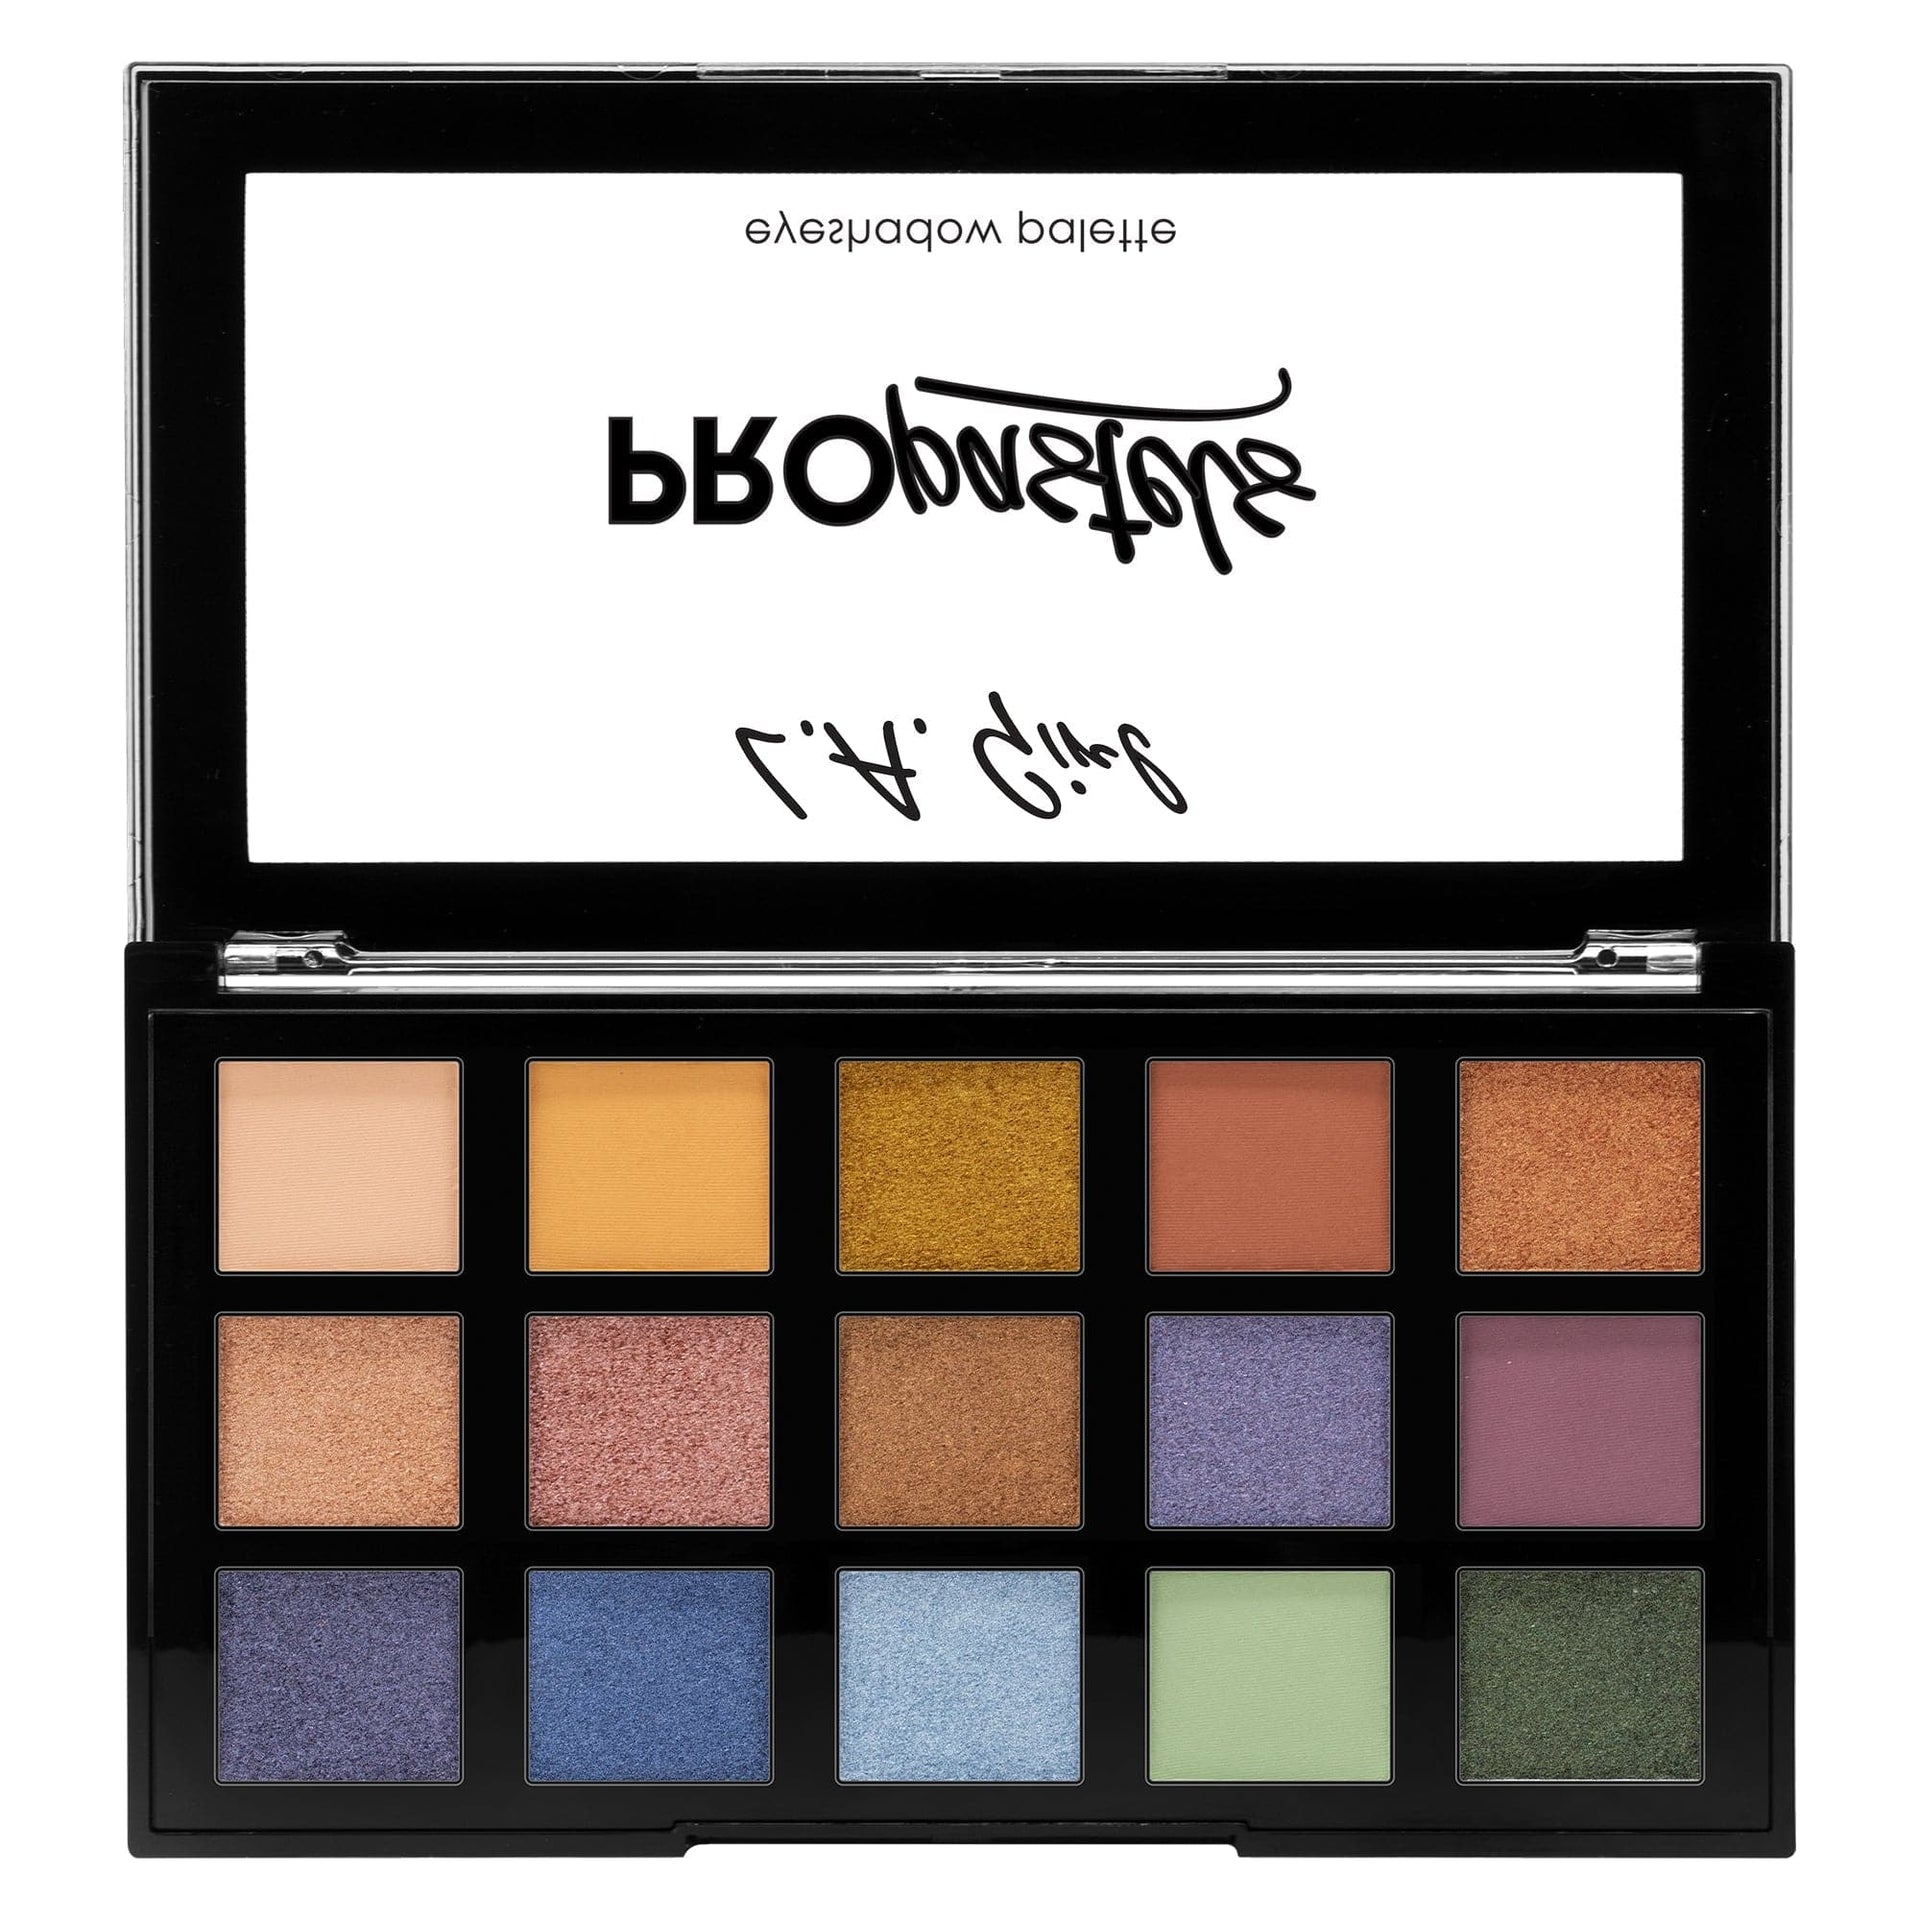 TEST Product - Copy of PRO Shadow Eye Palette 